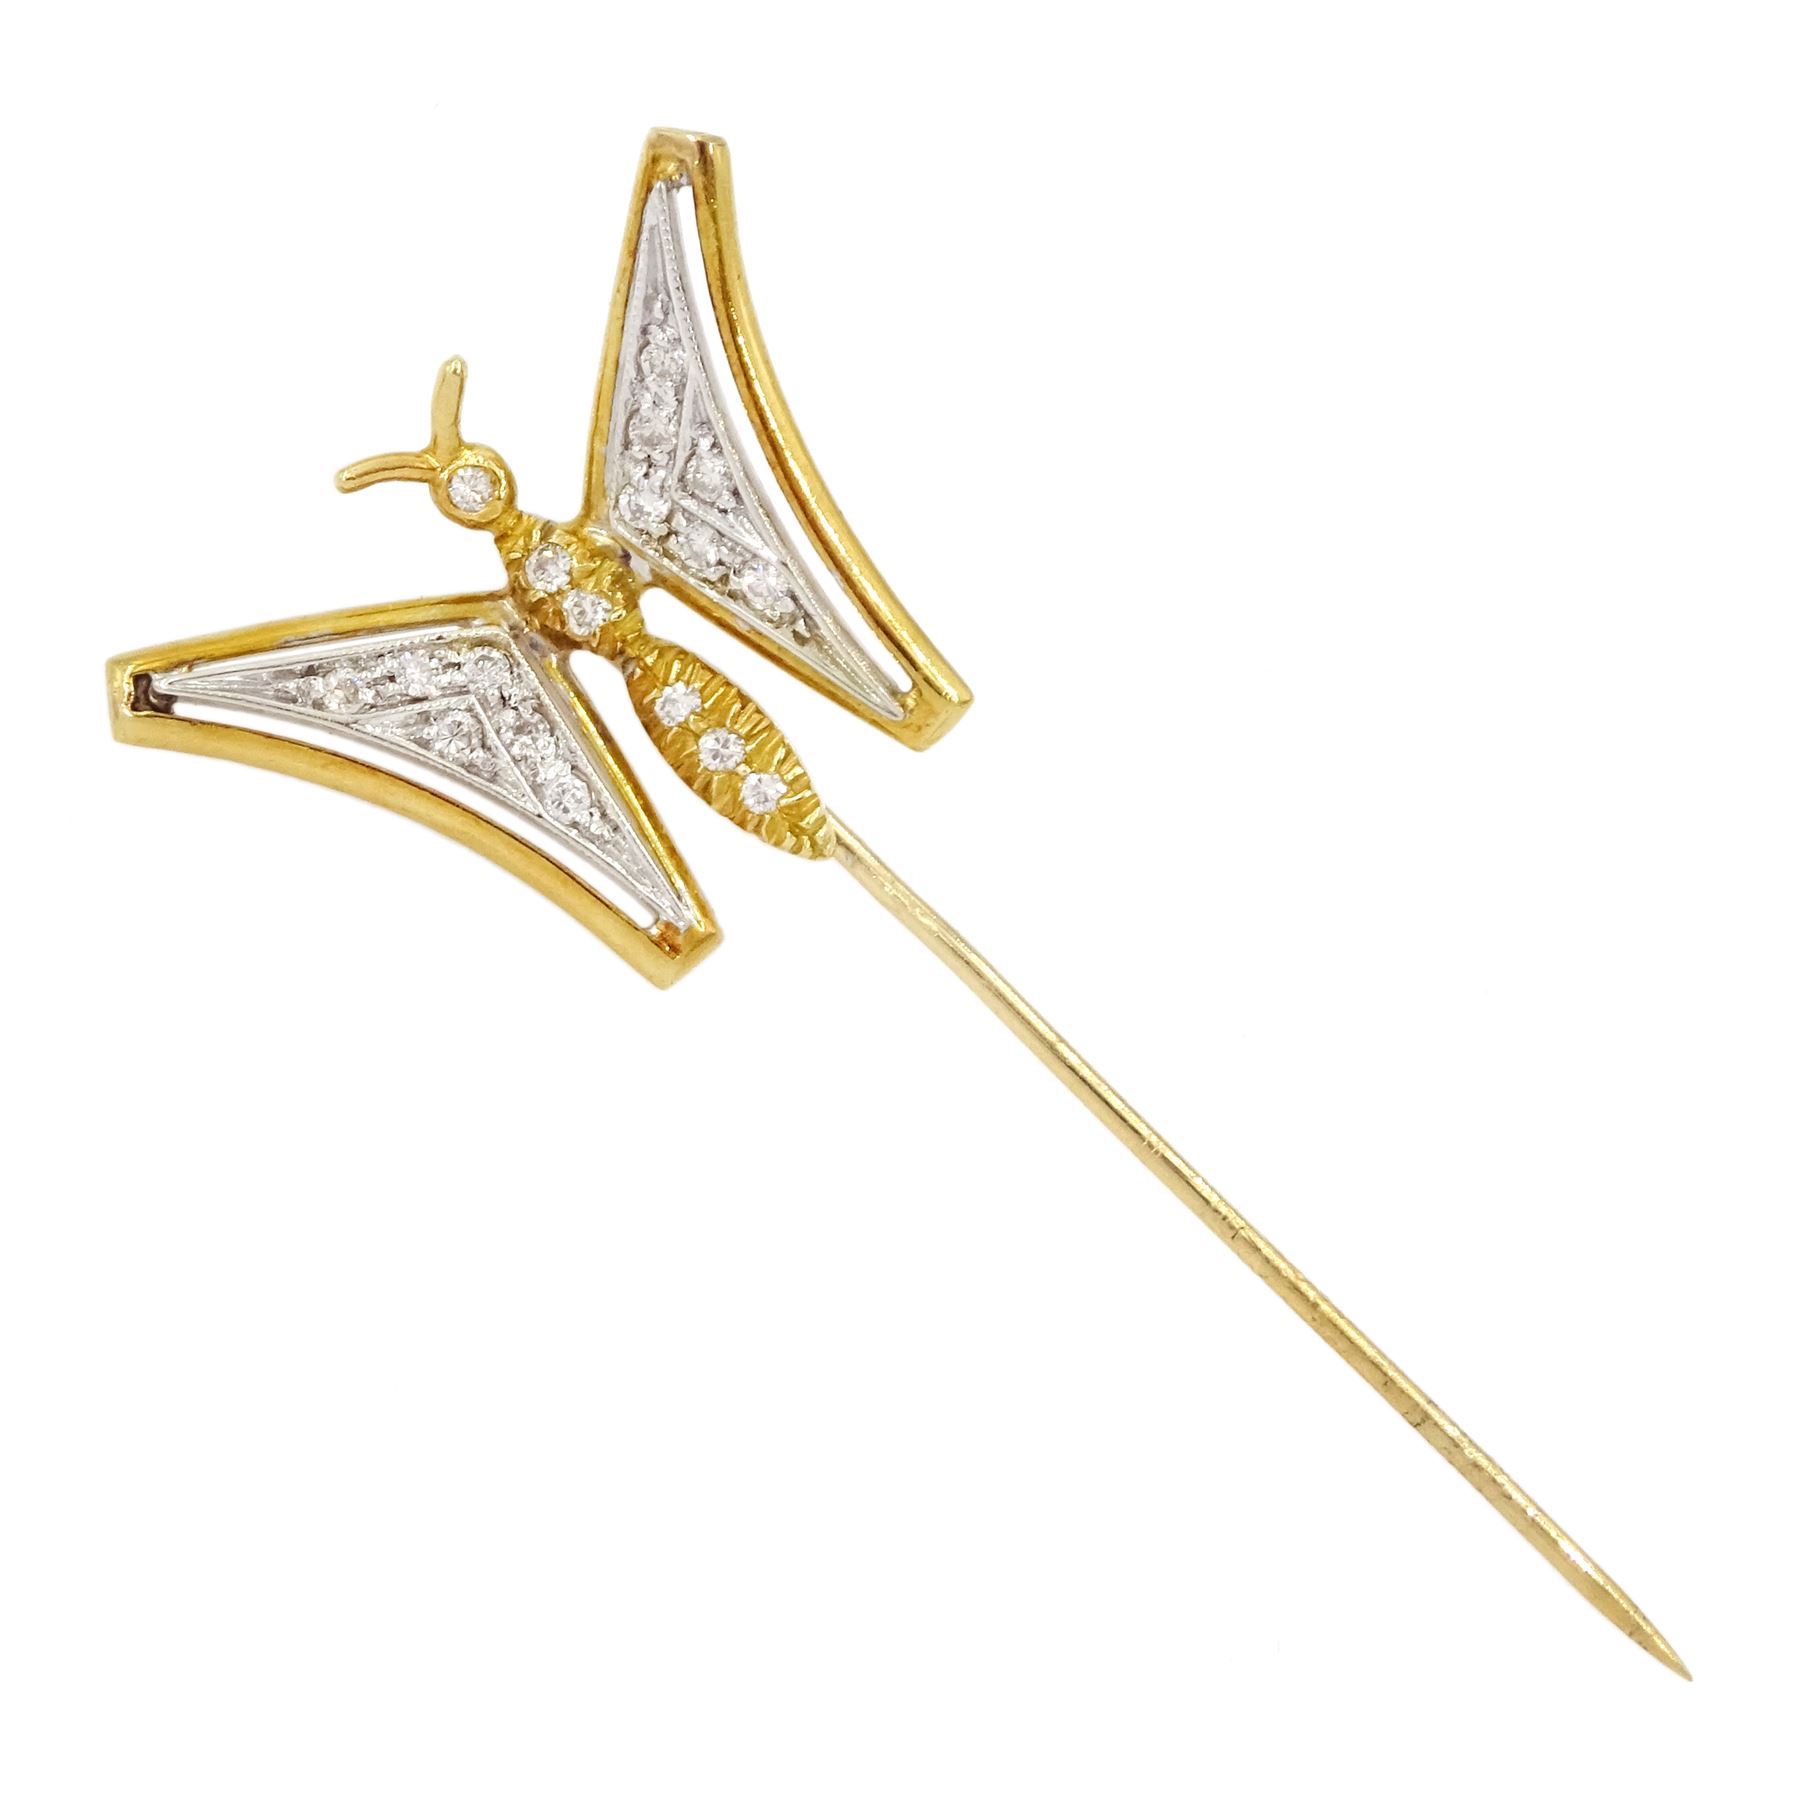 18ct white and yellow gold diamond butterfly stick pin